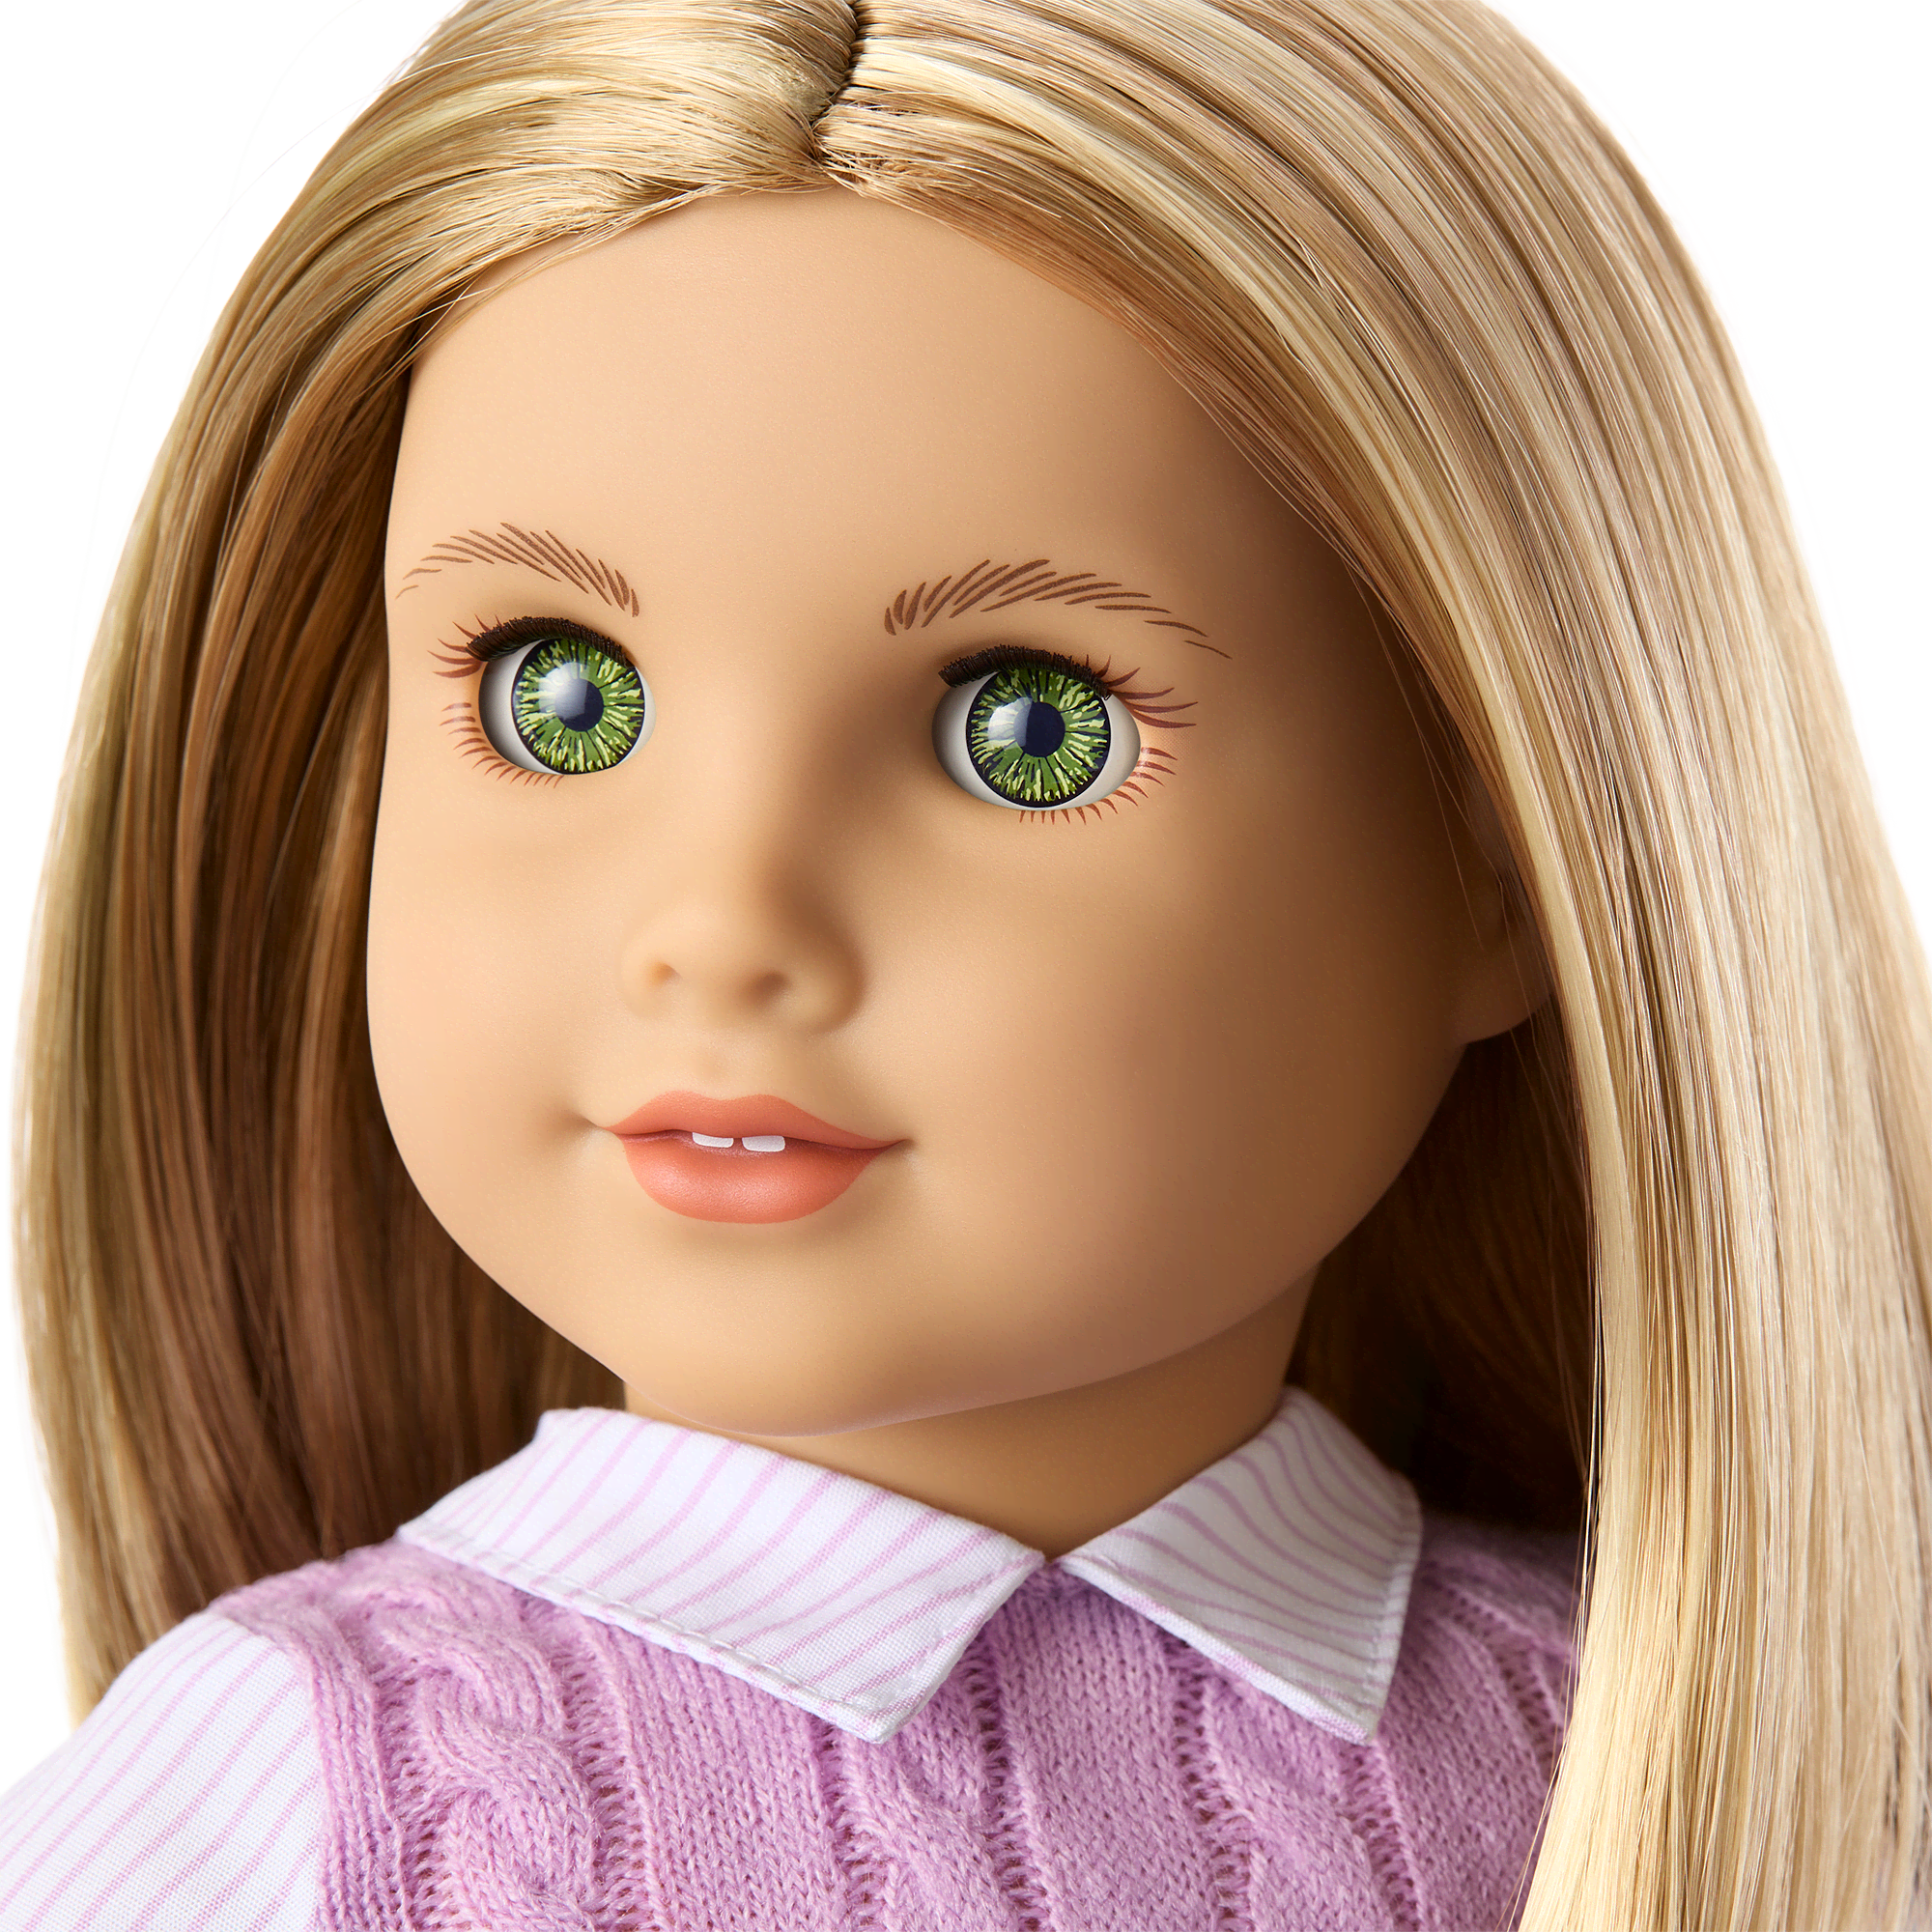 Isabel™ 18-inch Doll & Journal (Historical Characters)